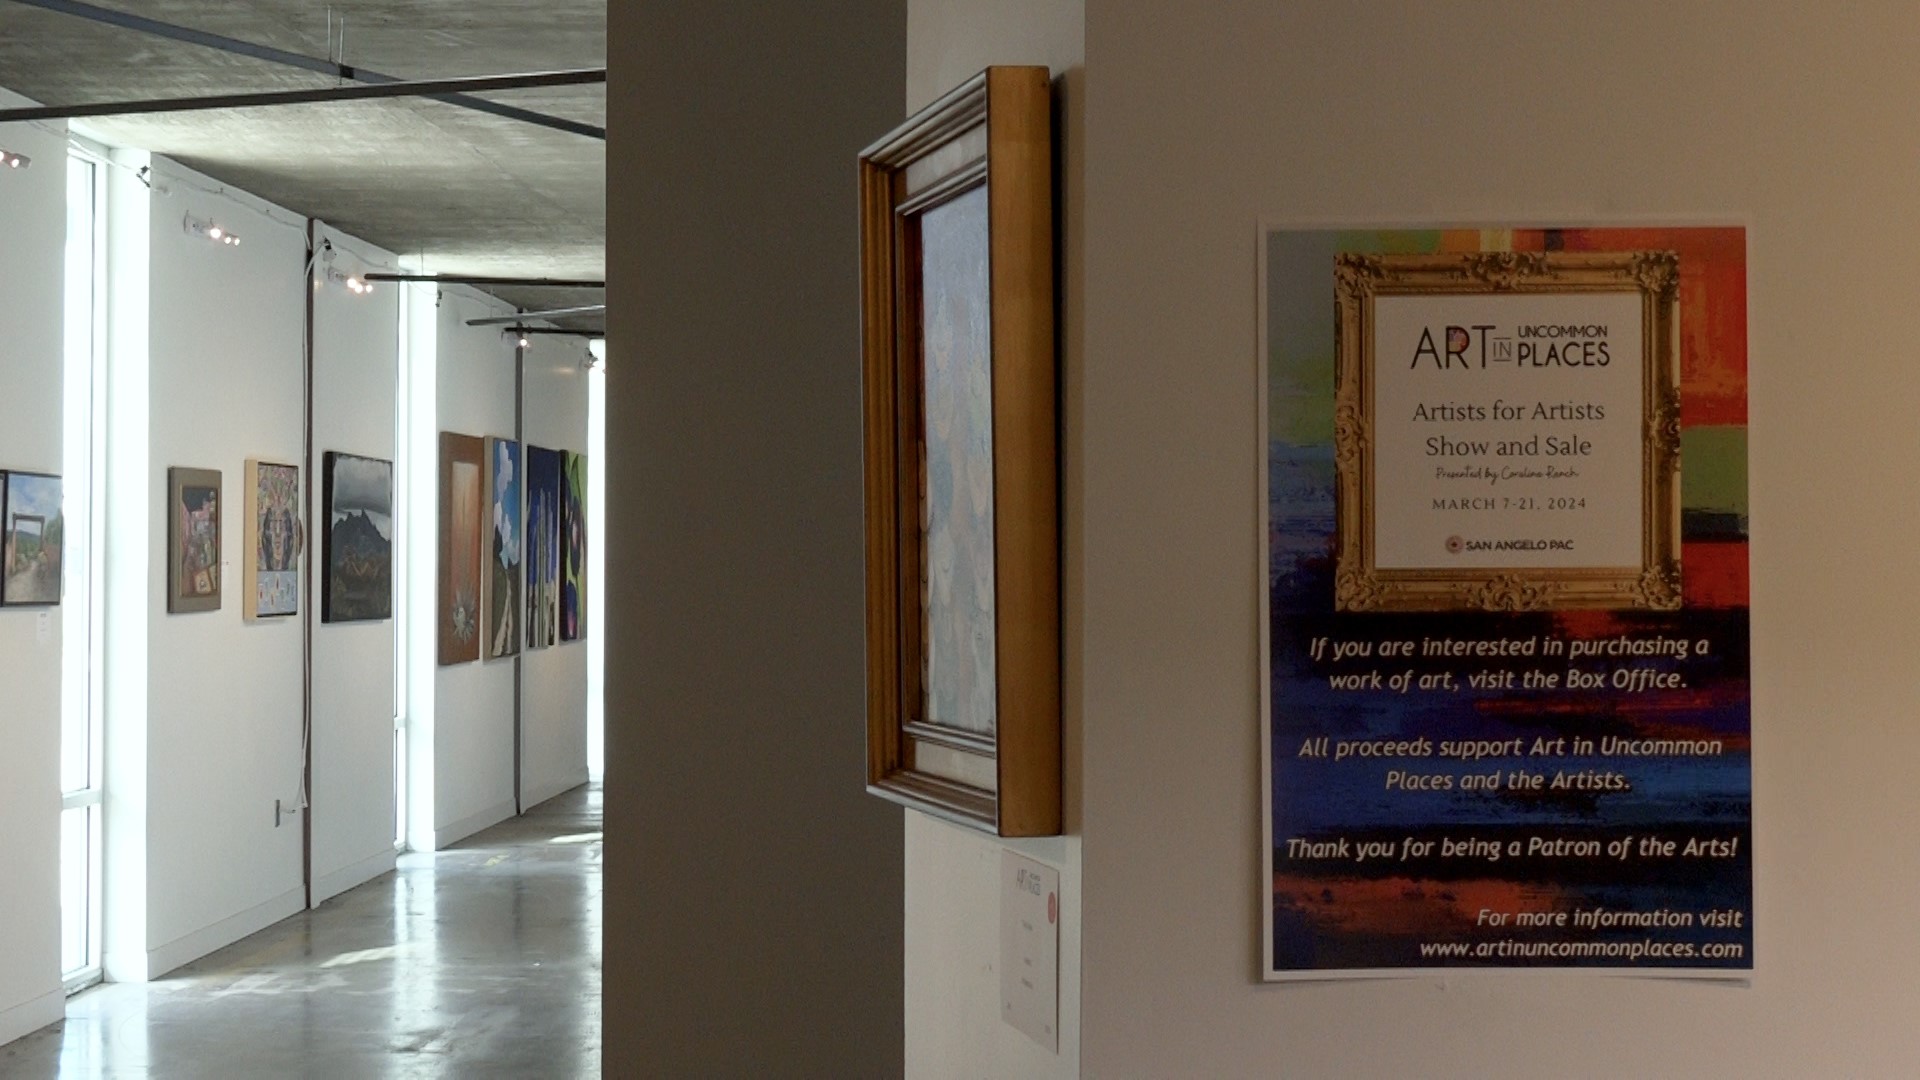 The show and sale will run until March 21 at the Stephens Performing Arts Center.